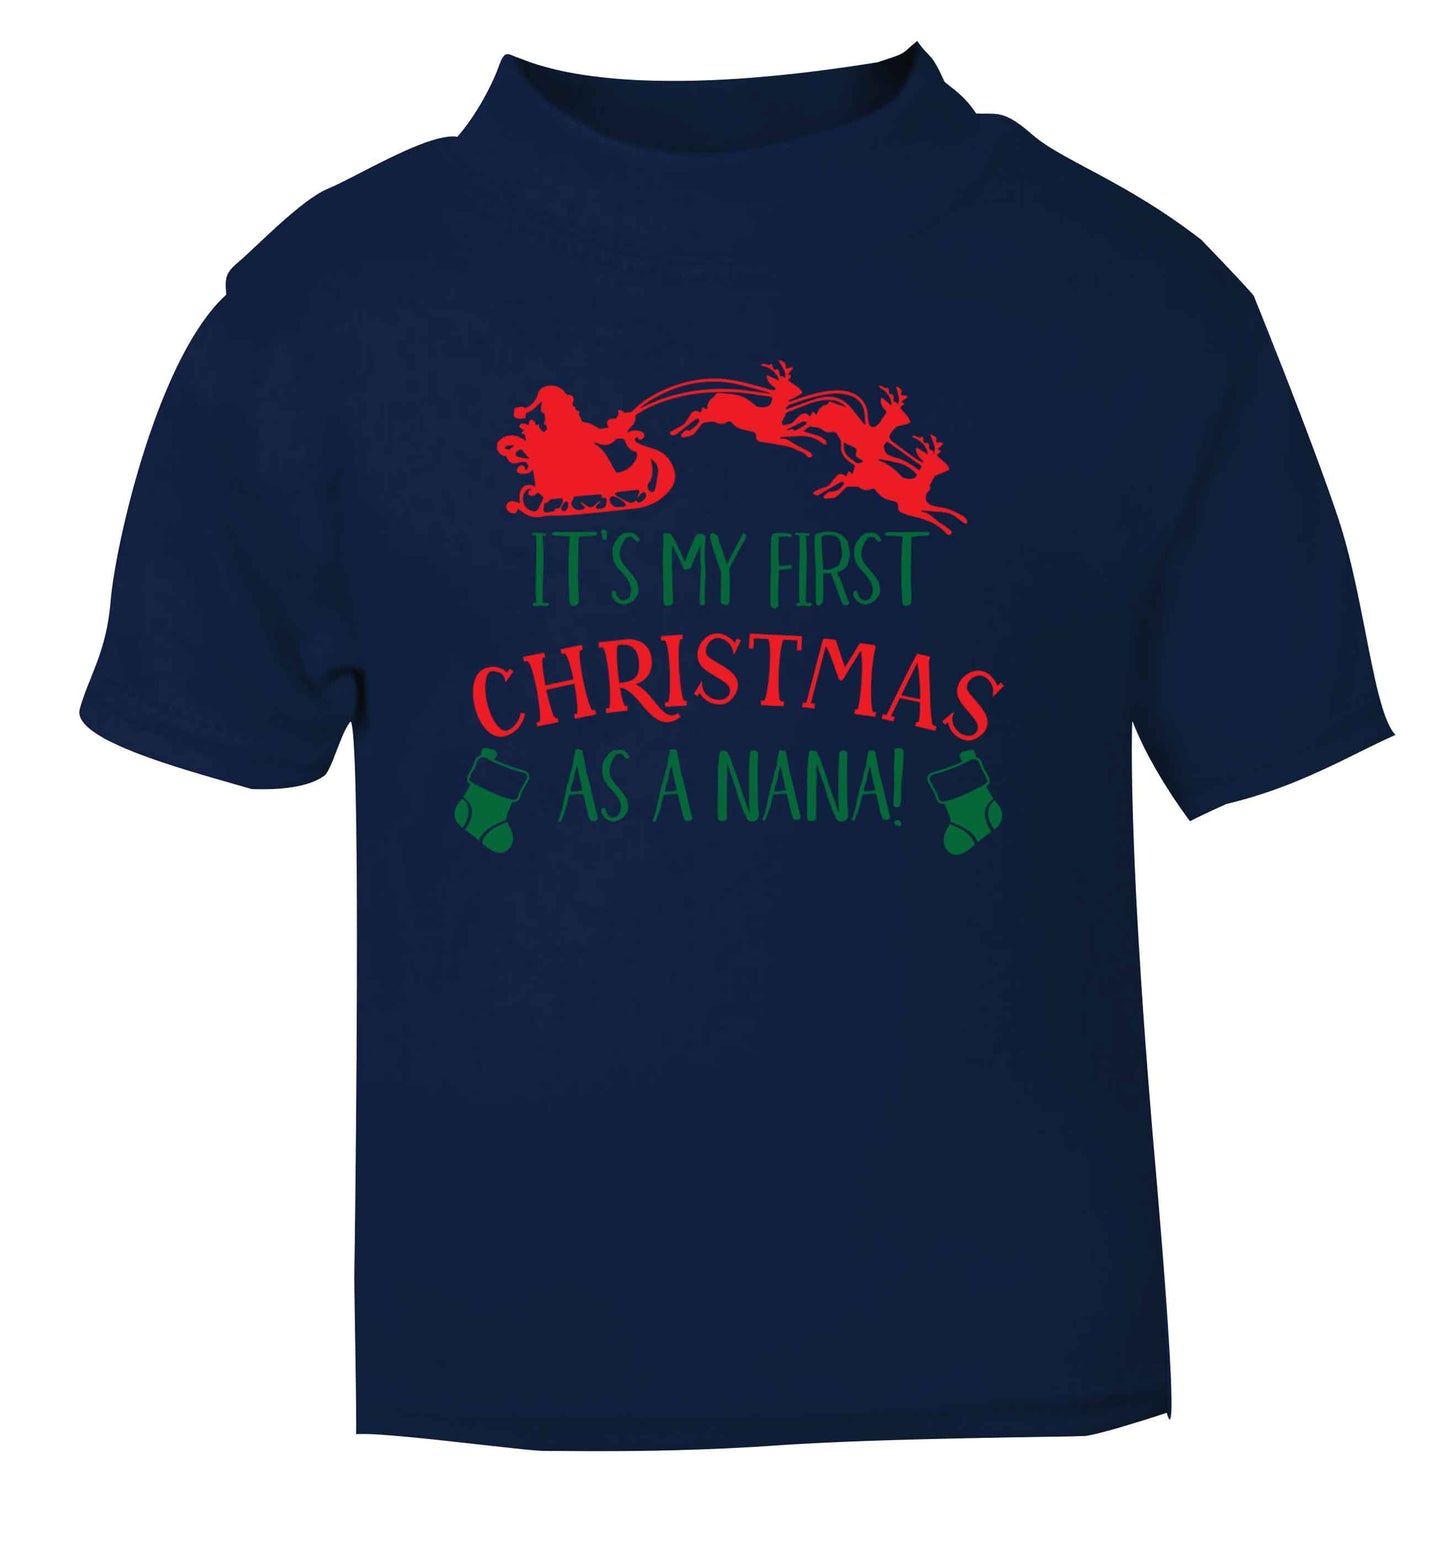 It's my first Christmas as a nana navy Baby Toddler Tshirt 2 Years